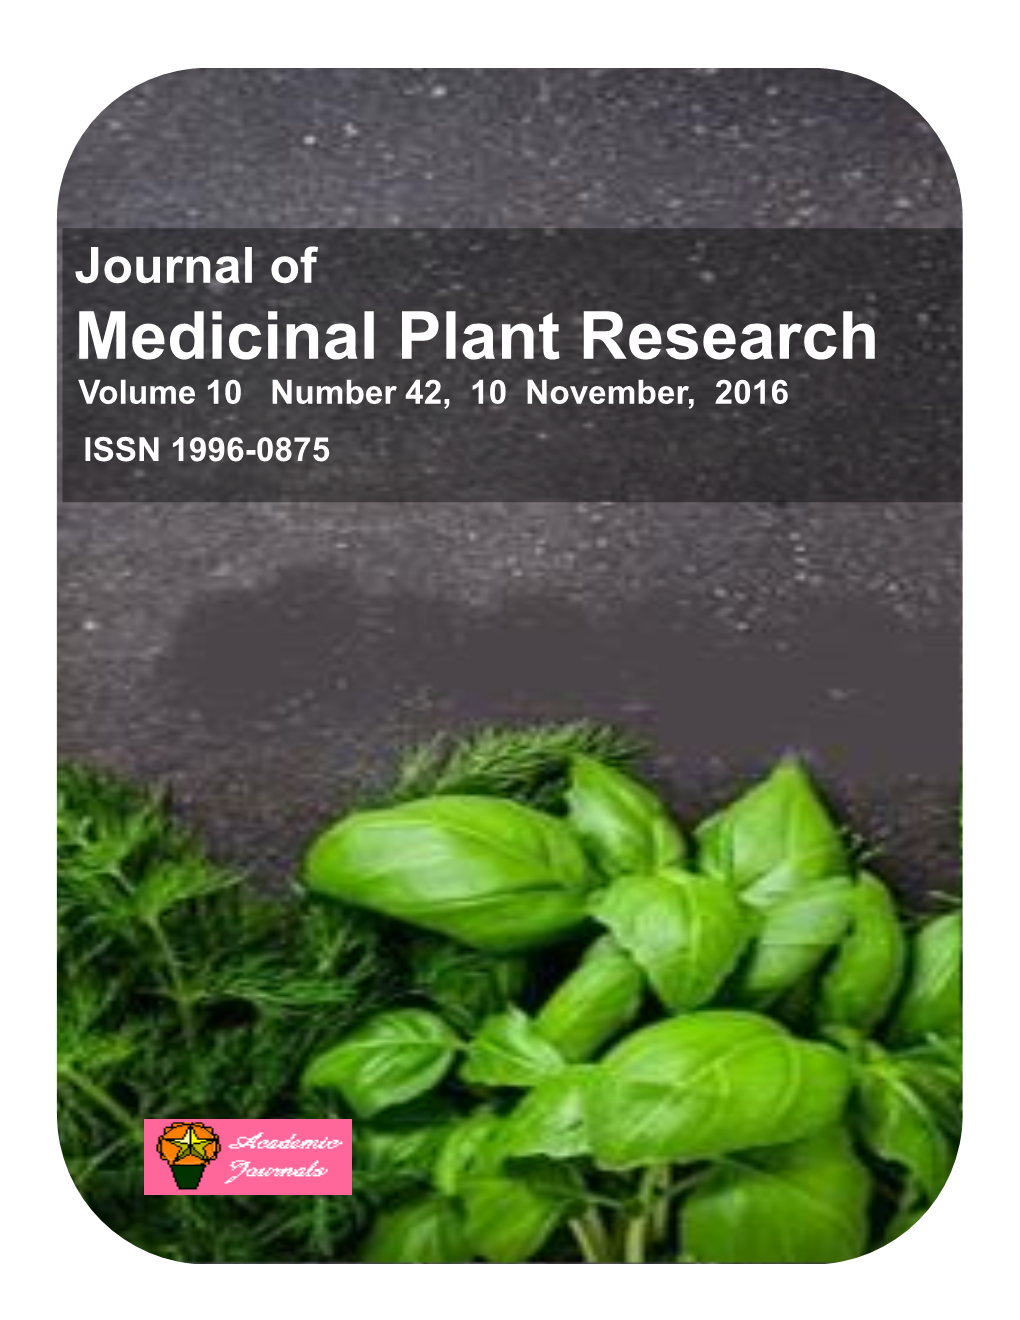 Medicinal Plant Research Volume 10 Number 42, 10 November, 2016 ISSN 1996-0875